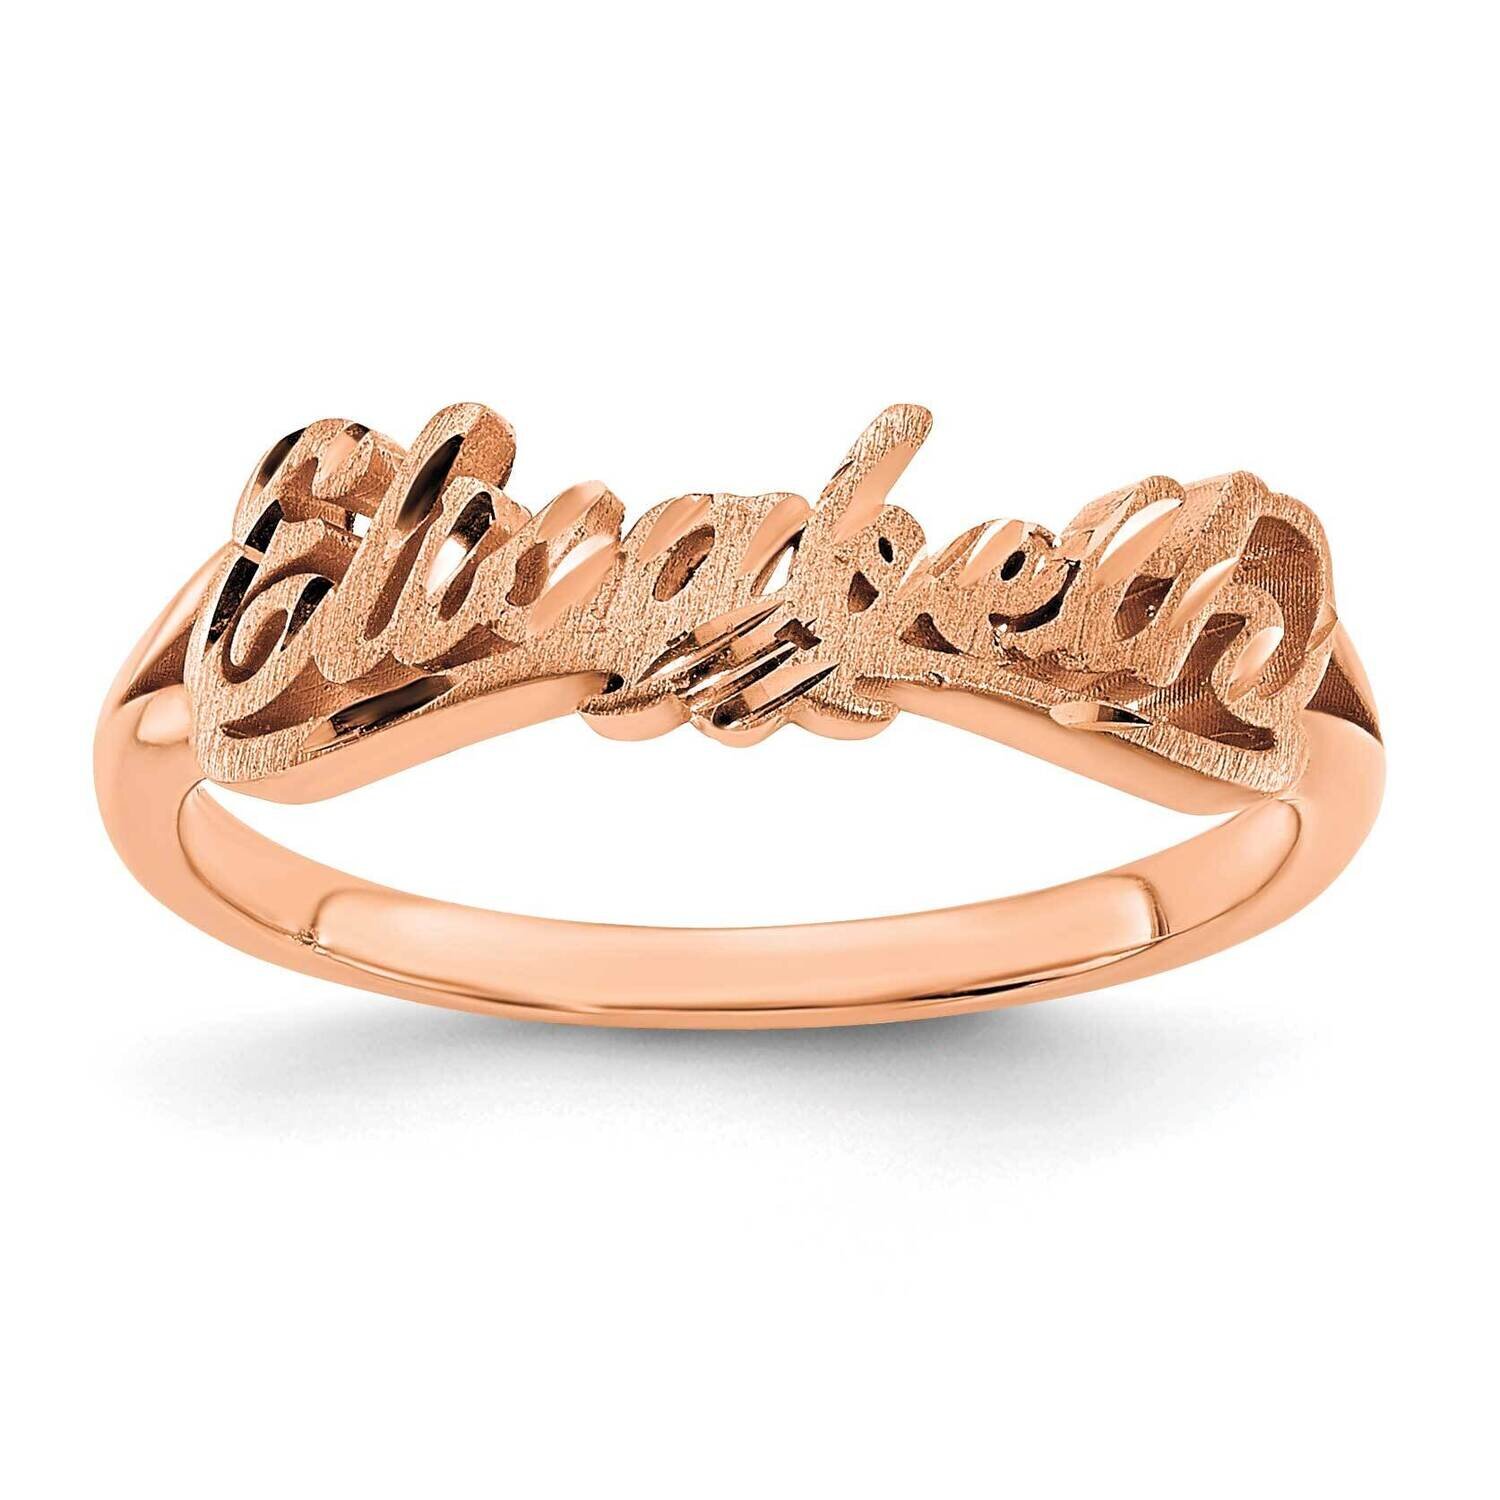 Personalized Ring 14k Rose Gold Polished XNR59R